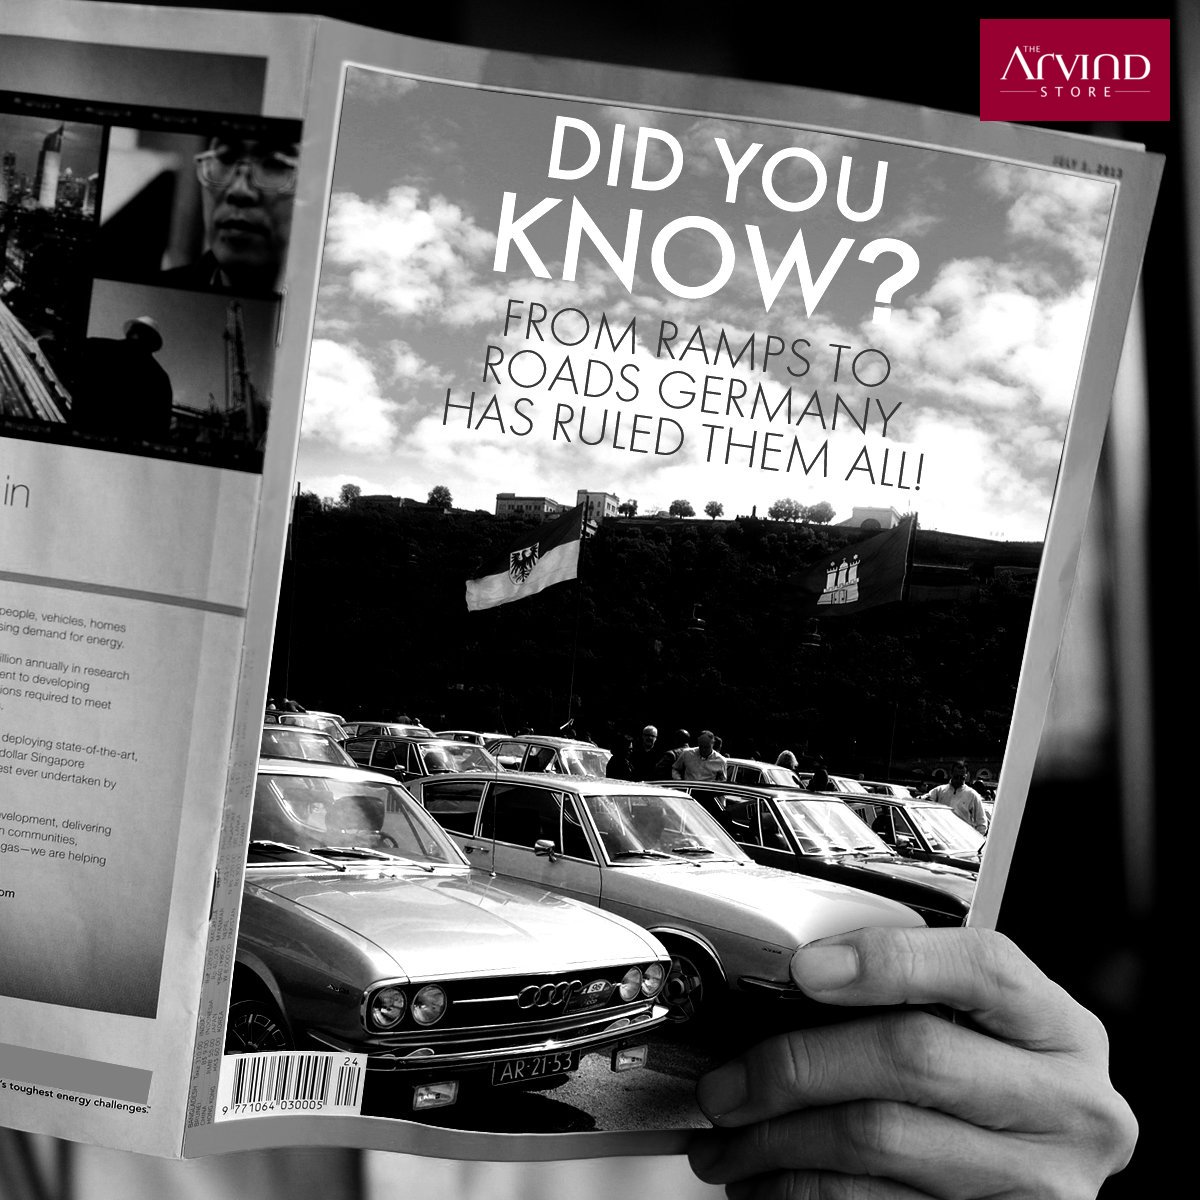 #DidYouKnow The first fashion magazine was published in Germany in 1586. https://t.co/DxntdjgA1U